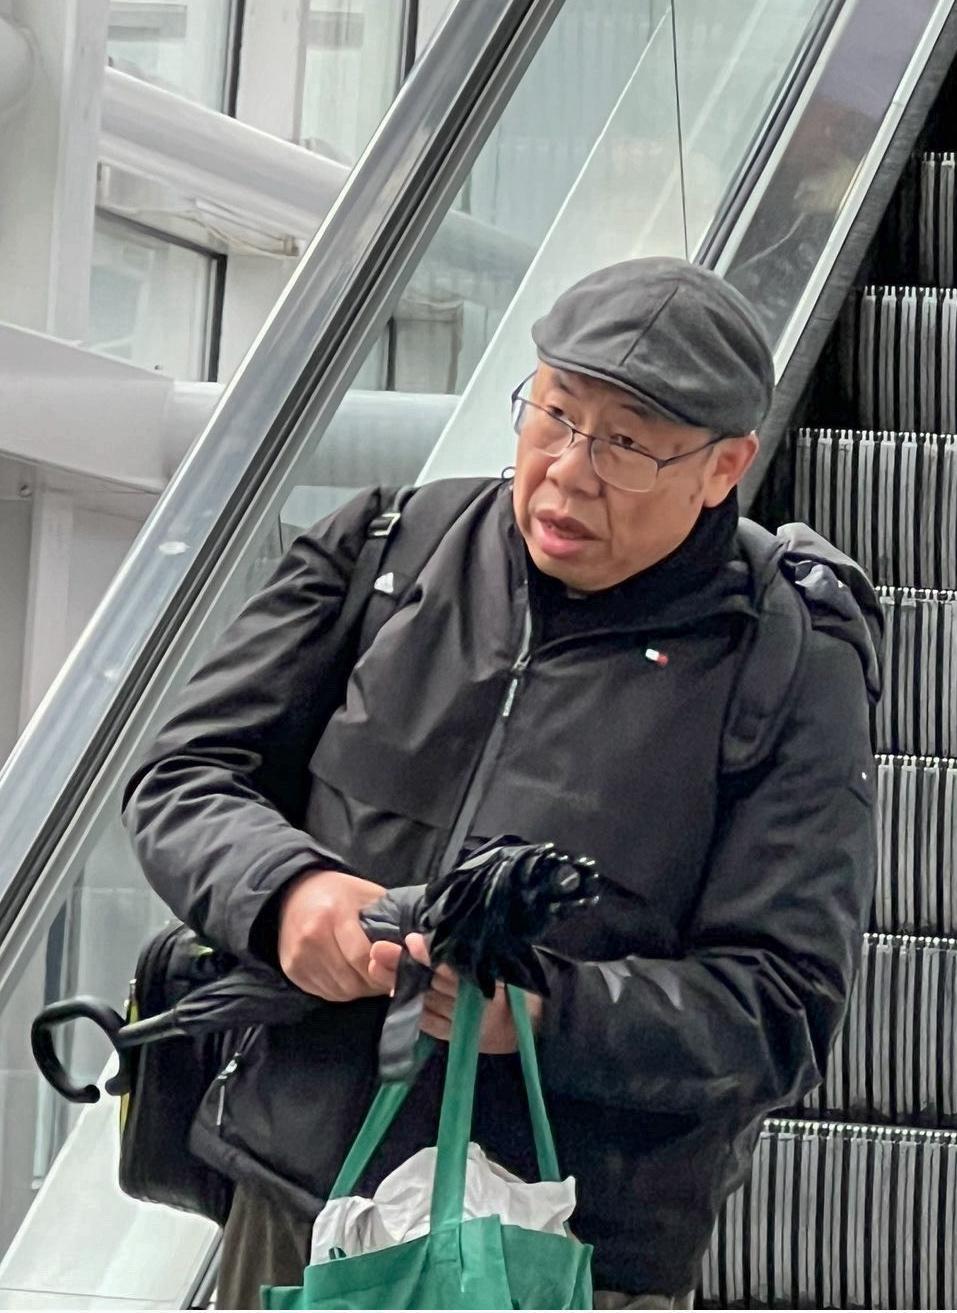 U.S. customs officer Mr. Ho at Chicago O'Hare International Airport. (The Epoch Times)